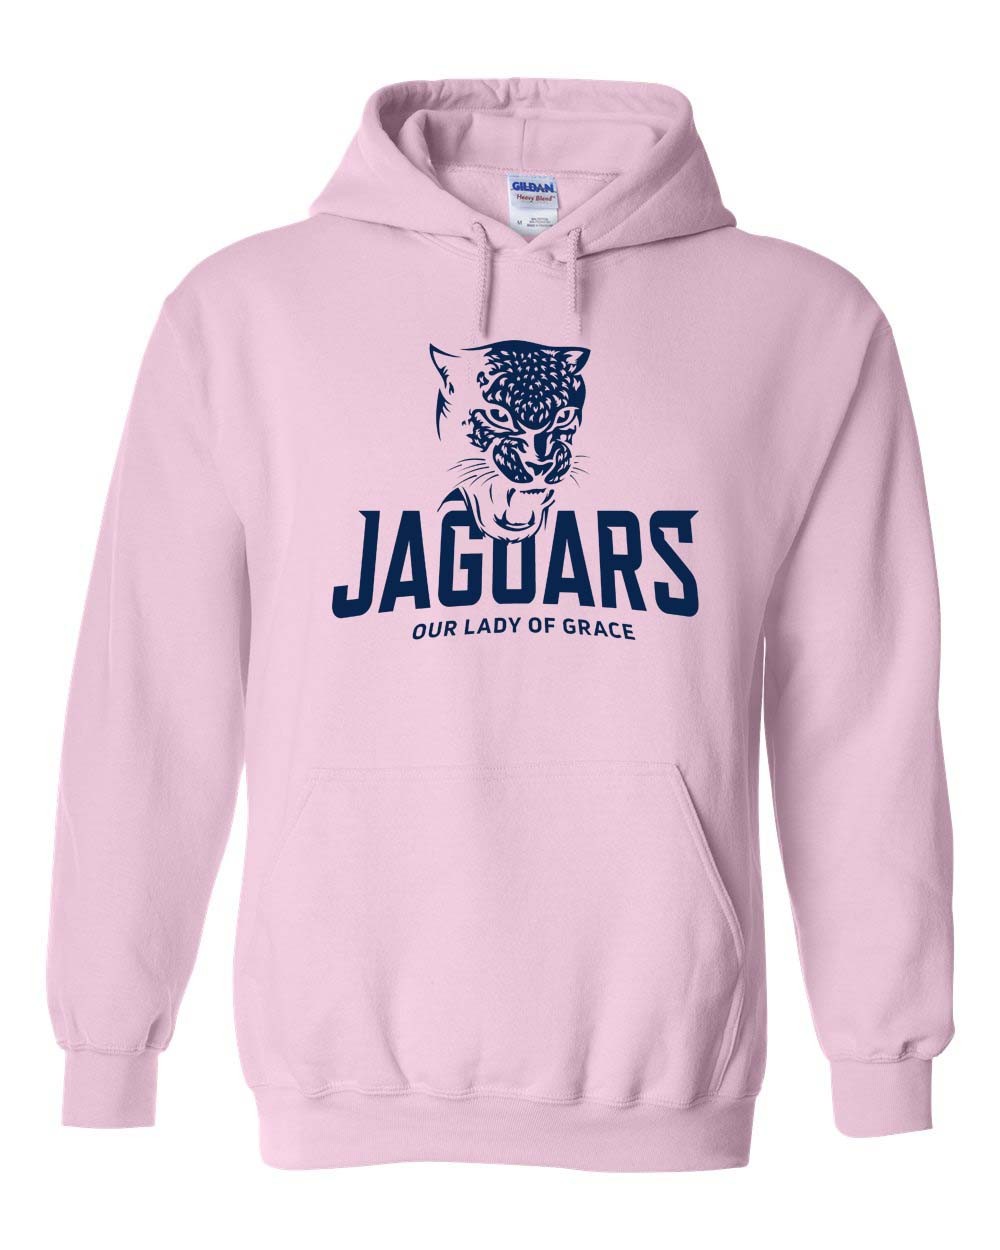 OLG Spirit Pullover Hoodie w/ Navy Logo - Please allow 2-3 Weeks for Delivery